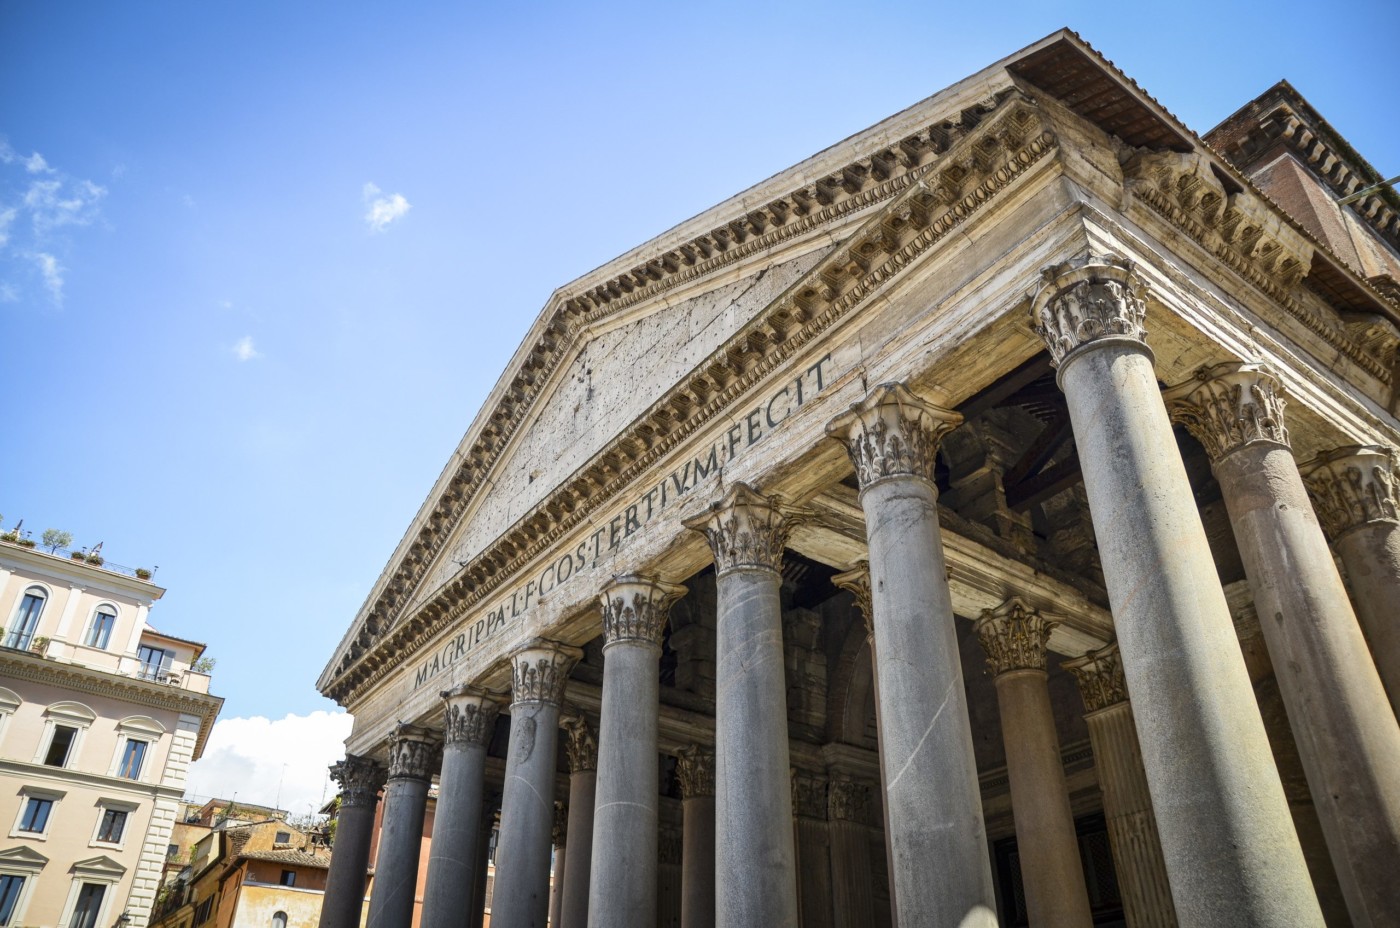 Low angle view of portico of the Pantheon in Rome, Italy.